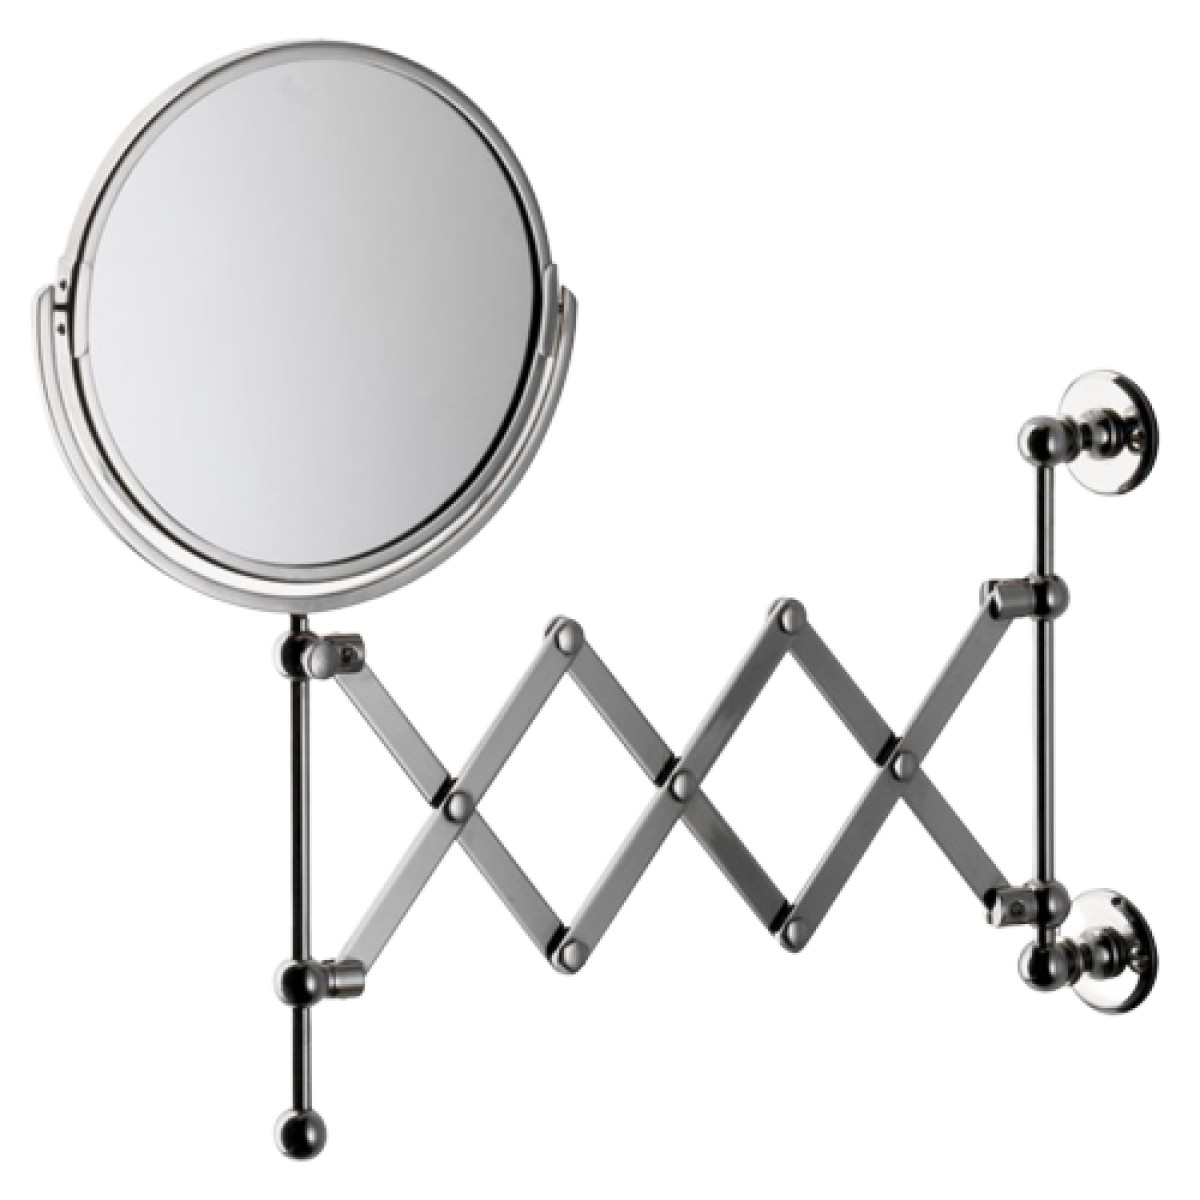 Crystal Wall Mounted 7 1/4" dia. Magnifying Extension Mirror | Highlight image